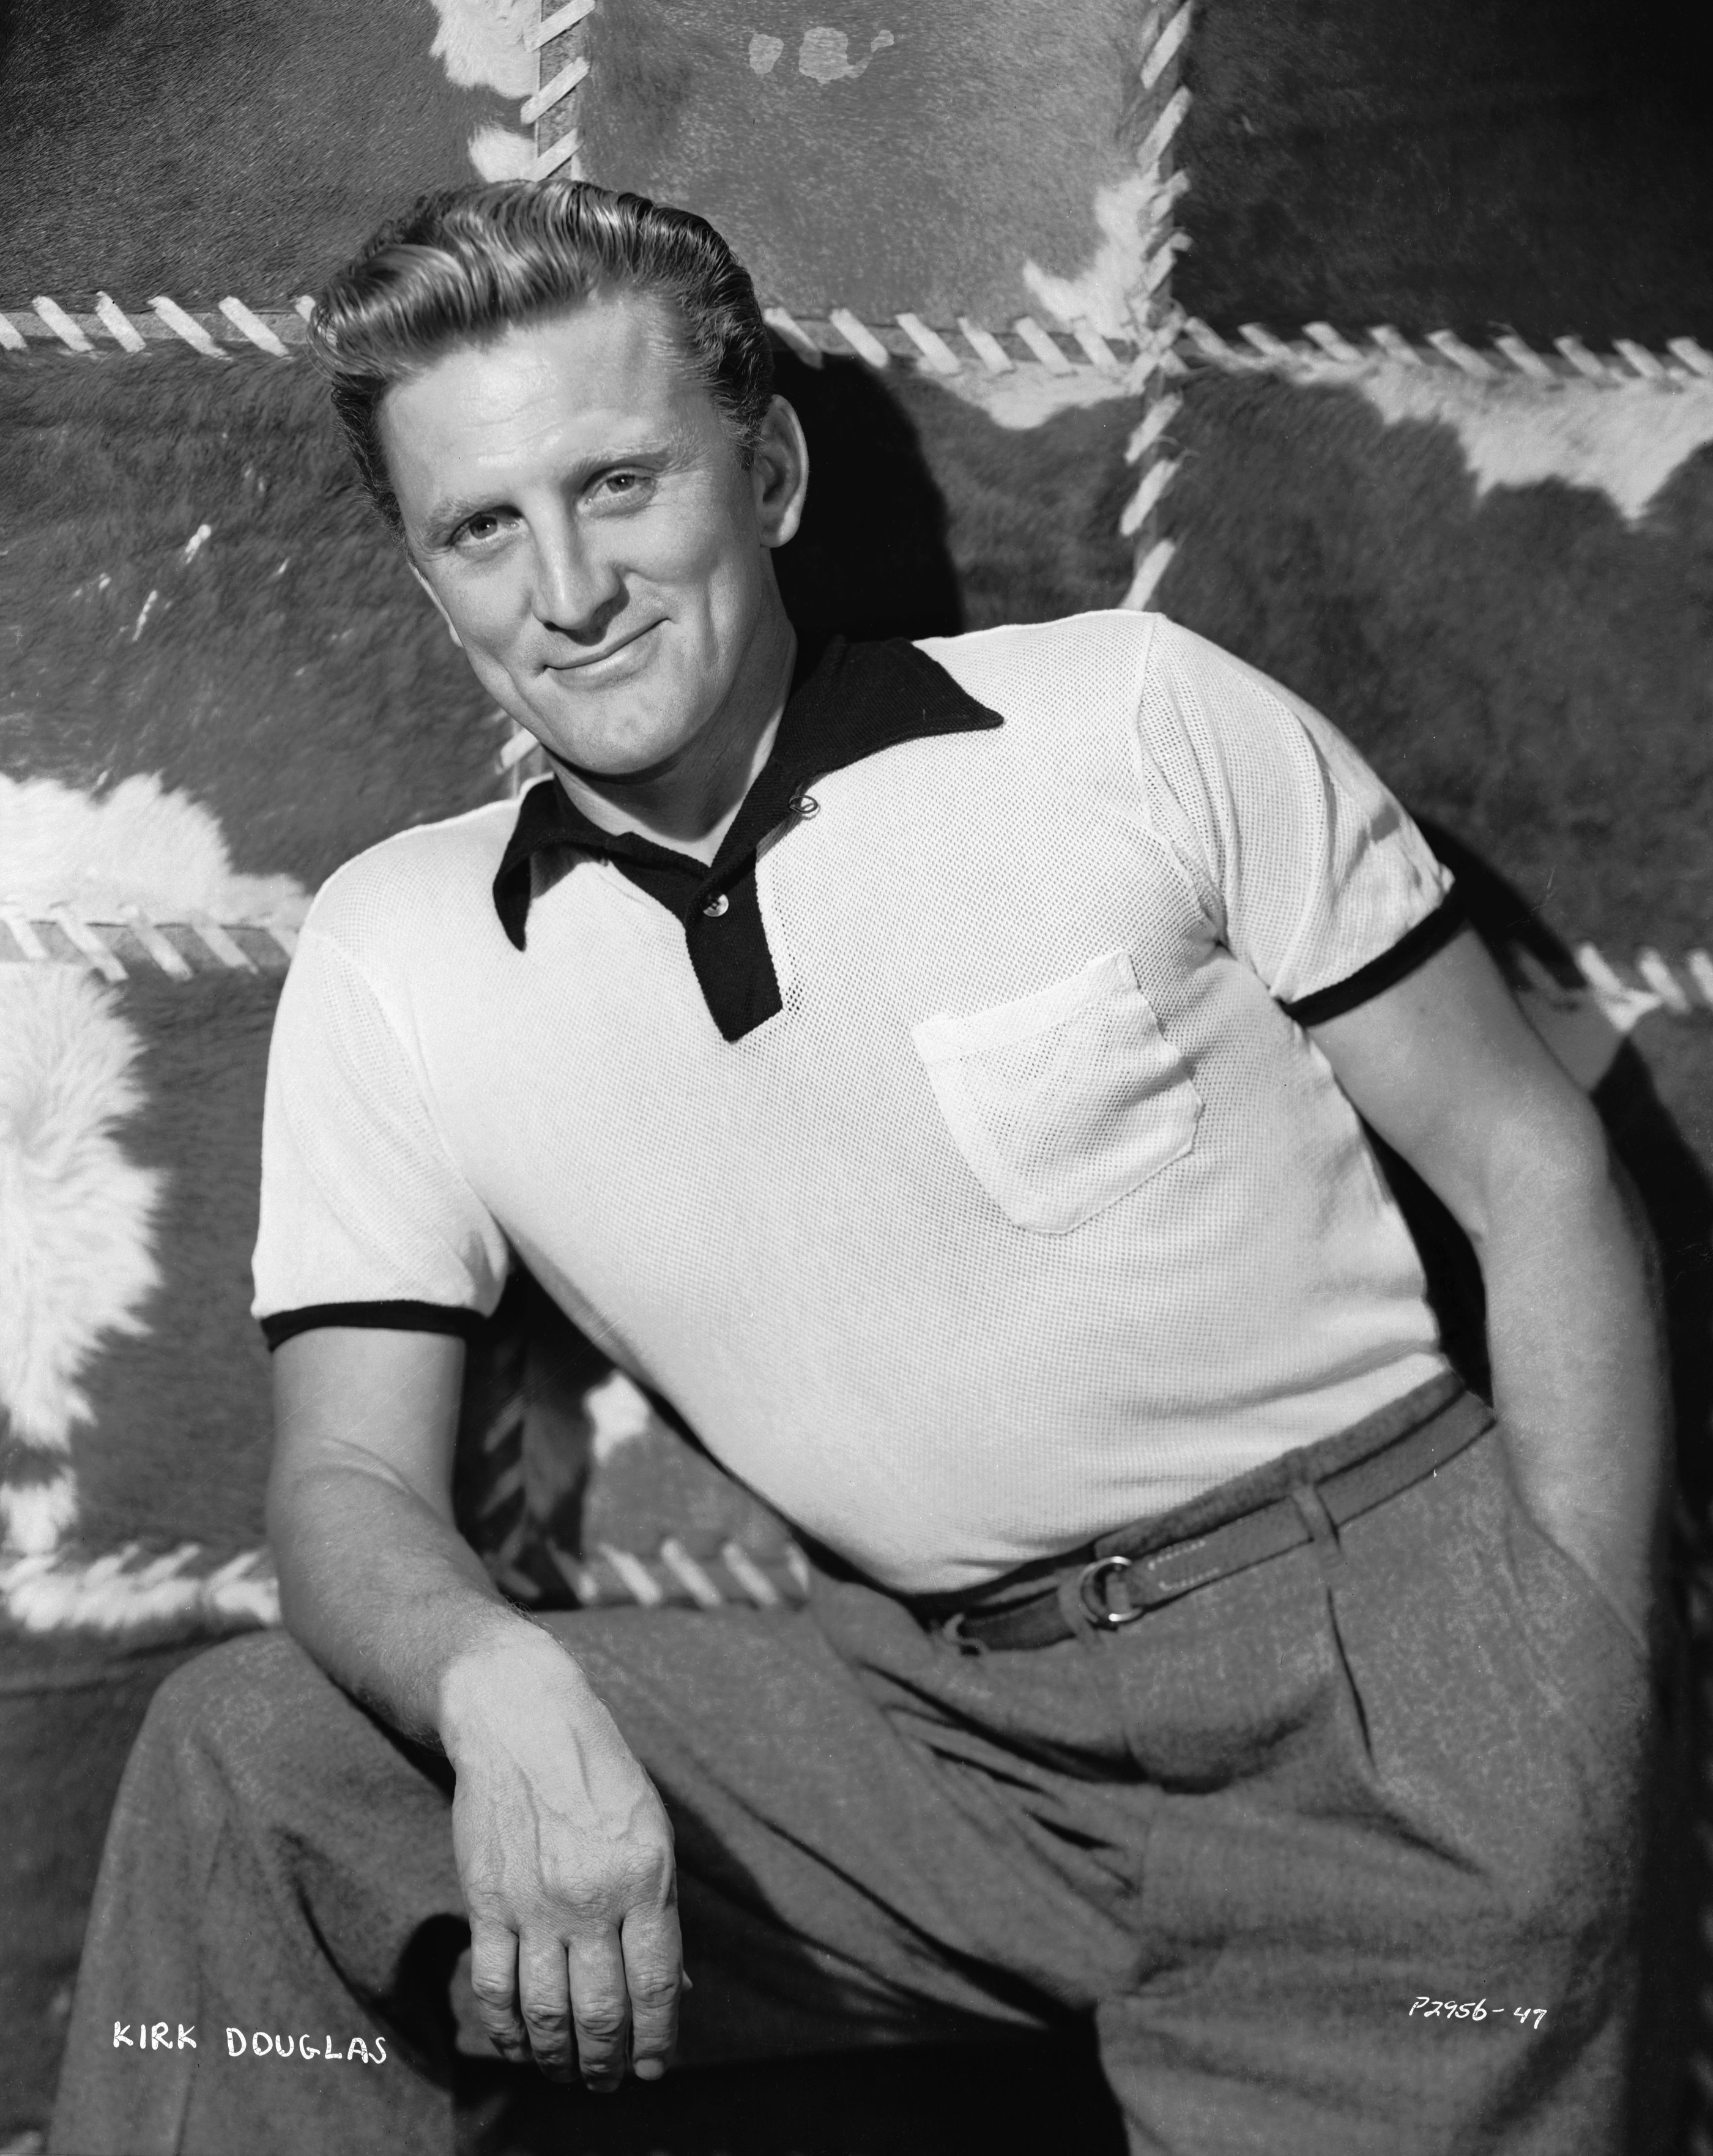  Kirk Douglas posing with one hand in his pocket while resting his other arm on his lap, wearing a black and white t-shirt and gray pants in 1950. / Source: Getty Images